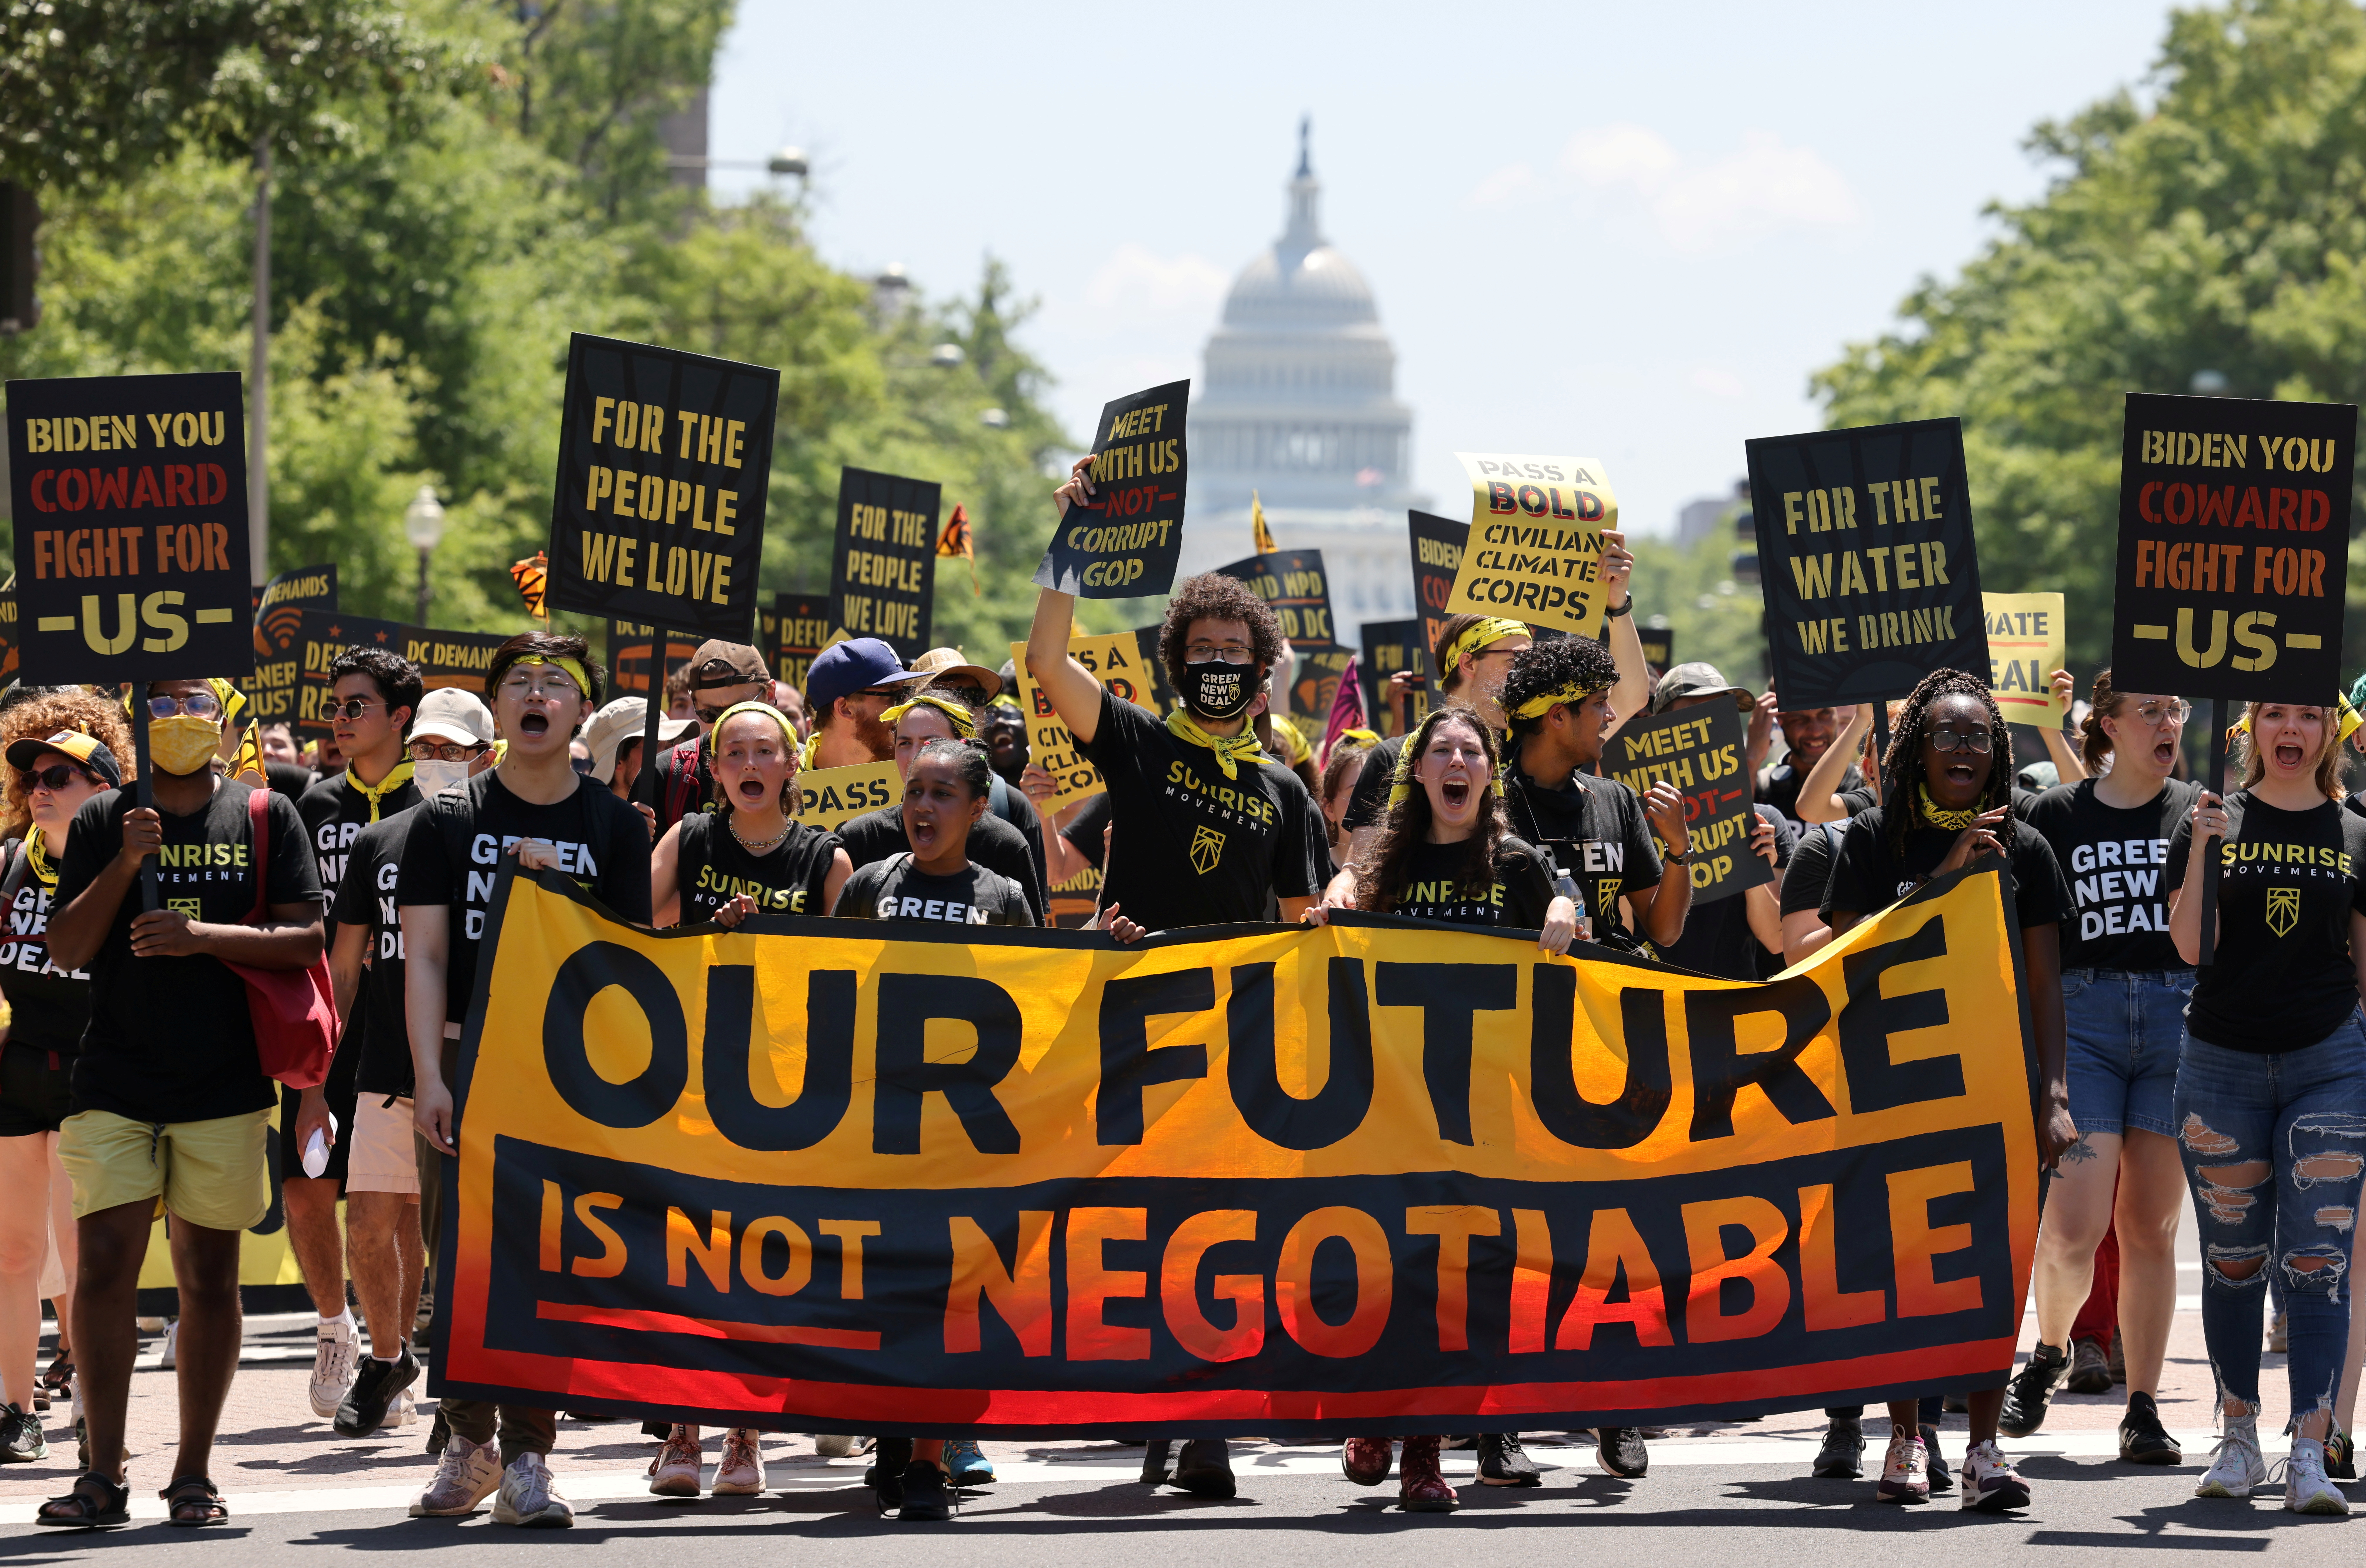 Environmental activists march on White House over climate change, in Washington